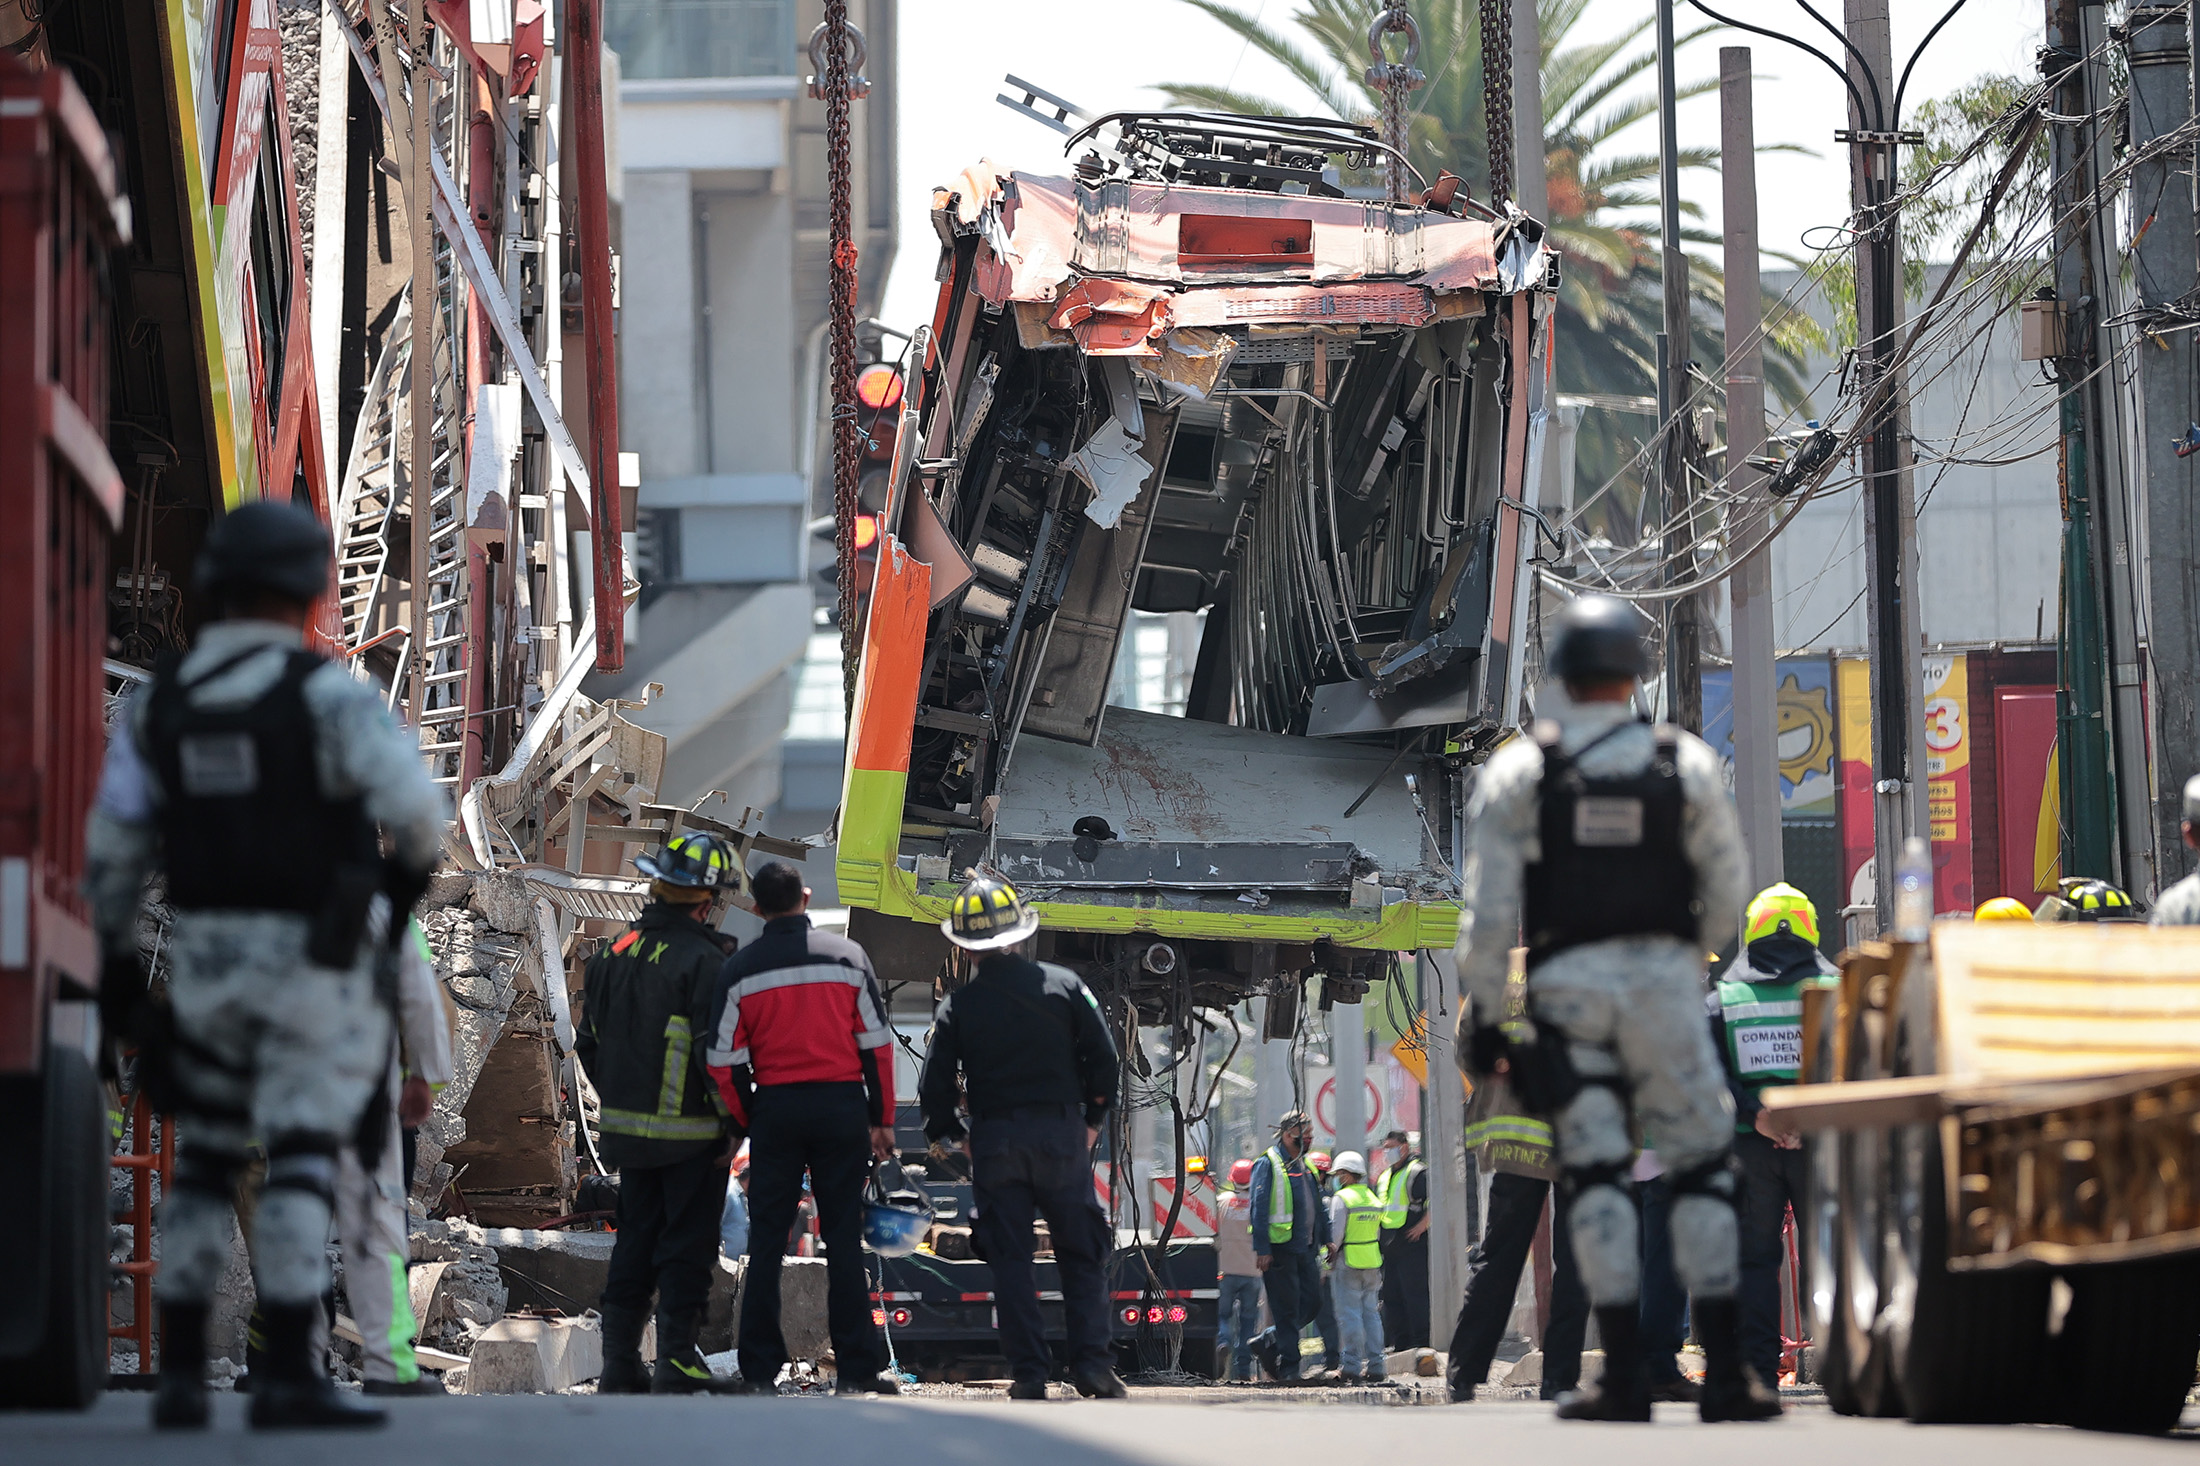 Emergency personel work to remove the debris of carriages in the area where a train overpass collapsed in Mexico City, on May 4.